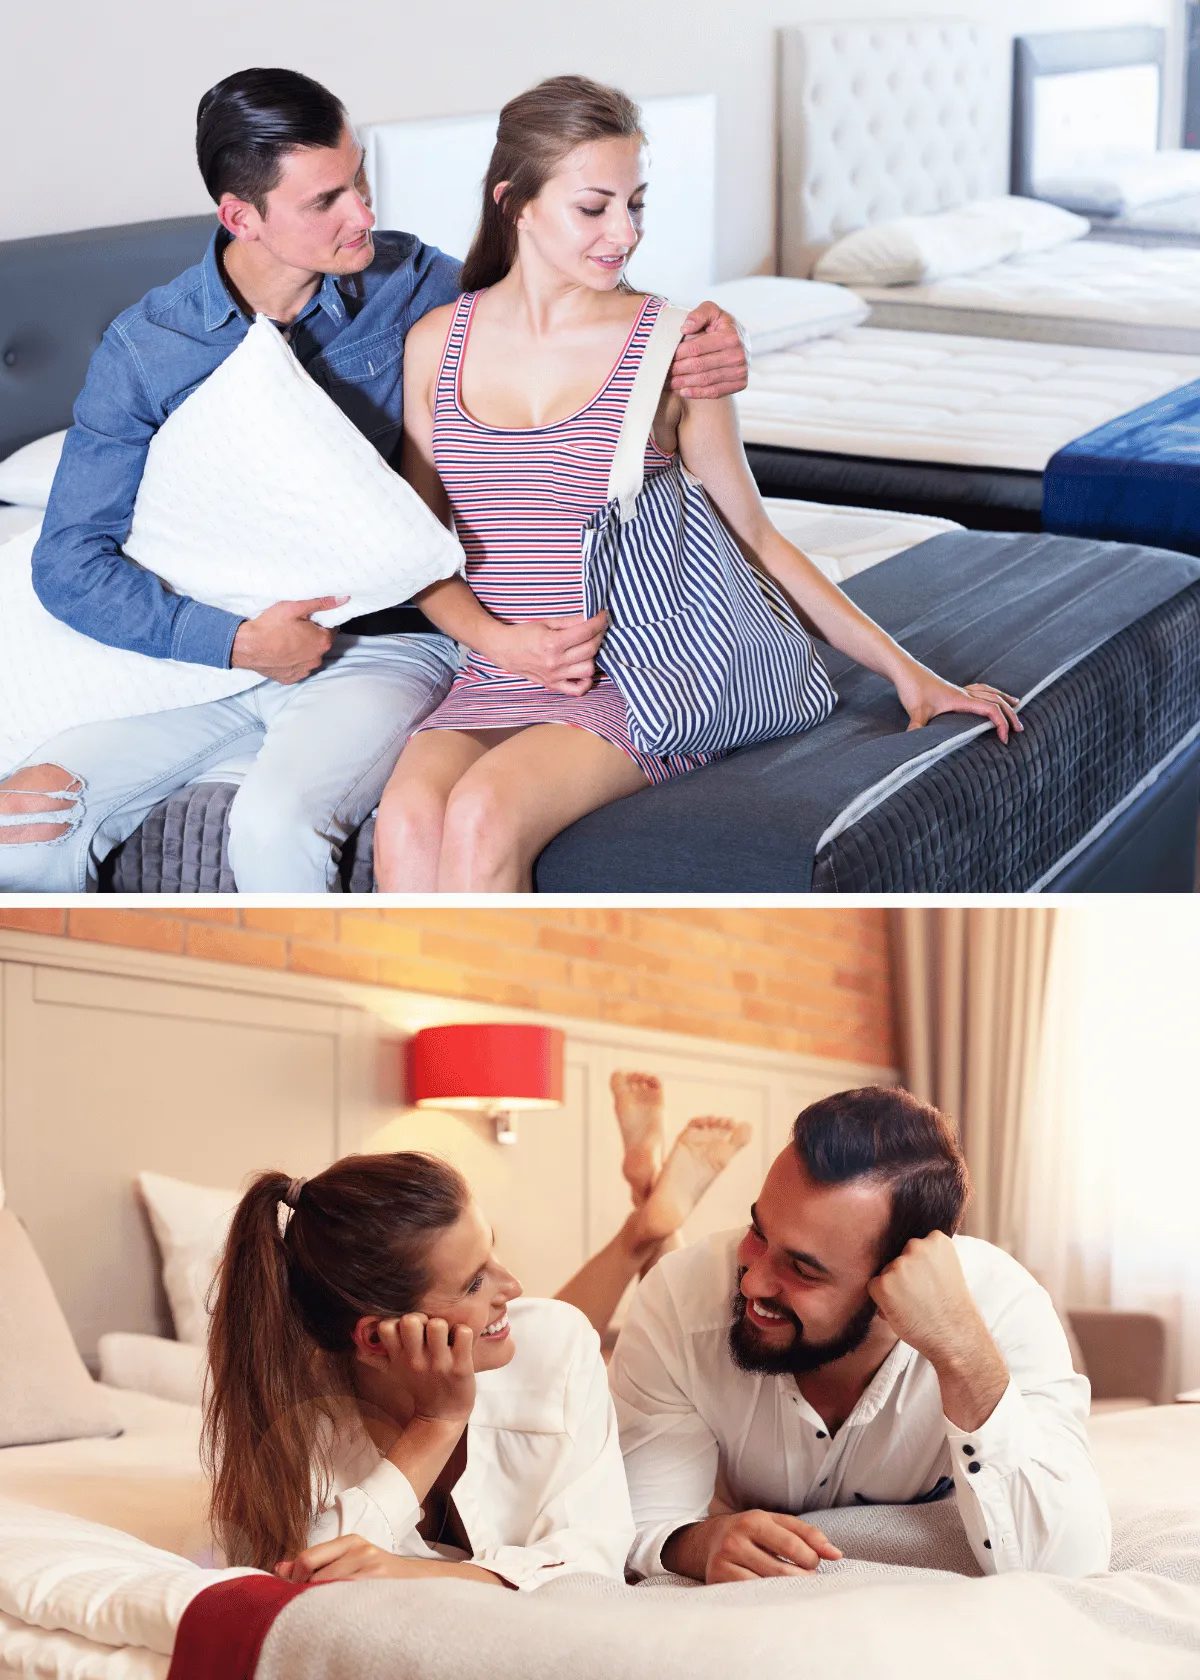 A Couple Trying a Mattress While Another Is Enjoying Their Mattress (Credit: Canva)